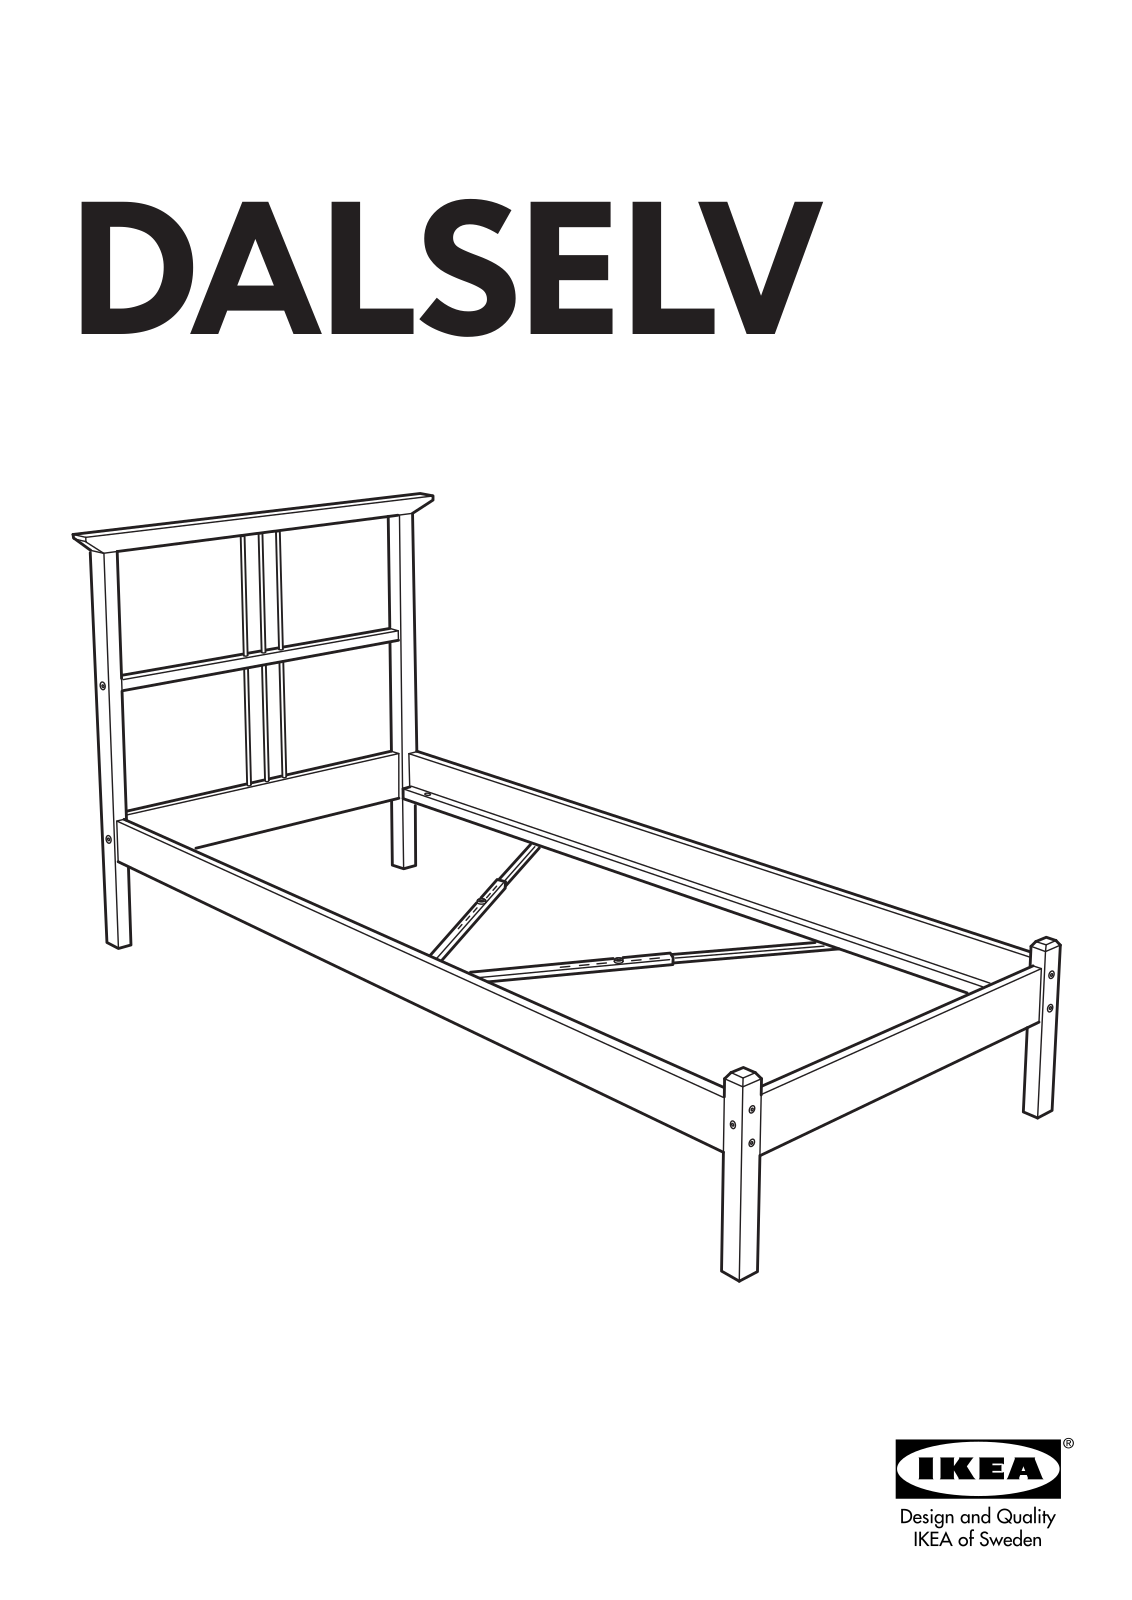 IKEA DALSELV BED FRAME TWIN Assembly Instruction